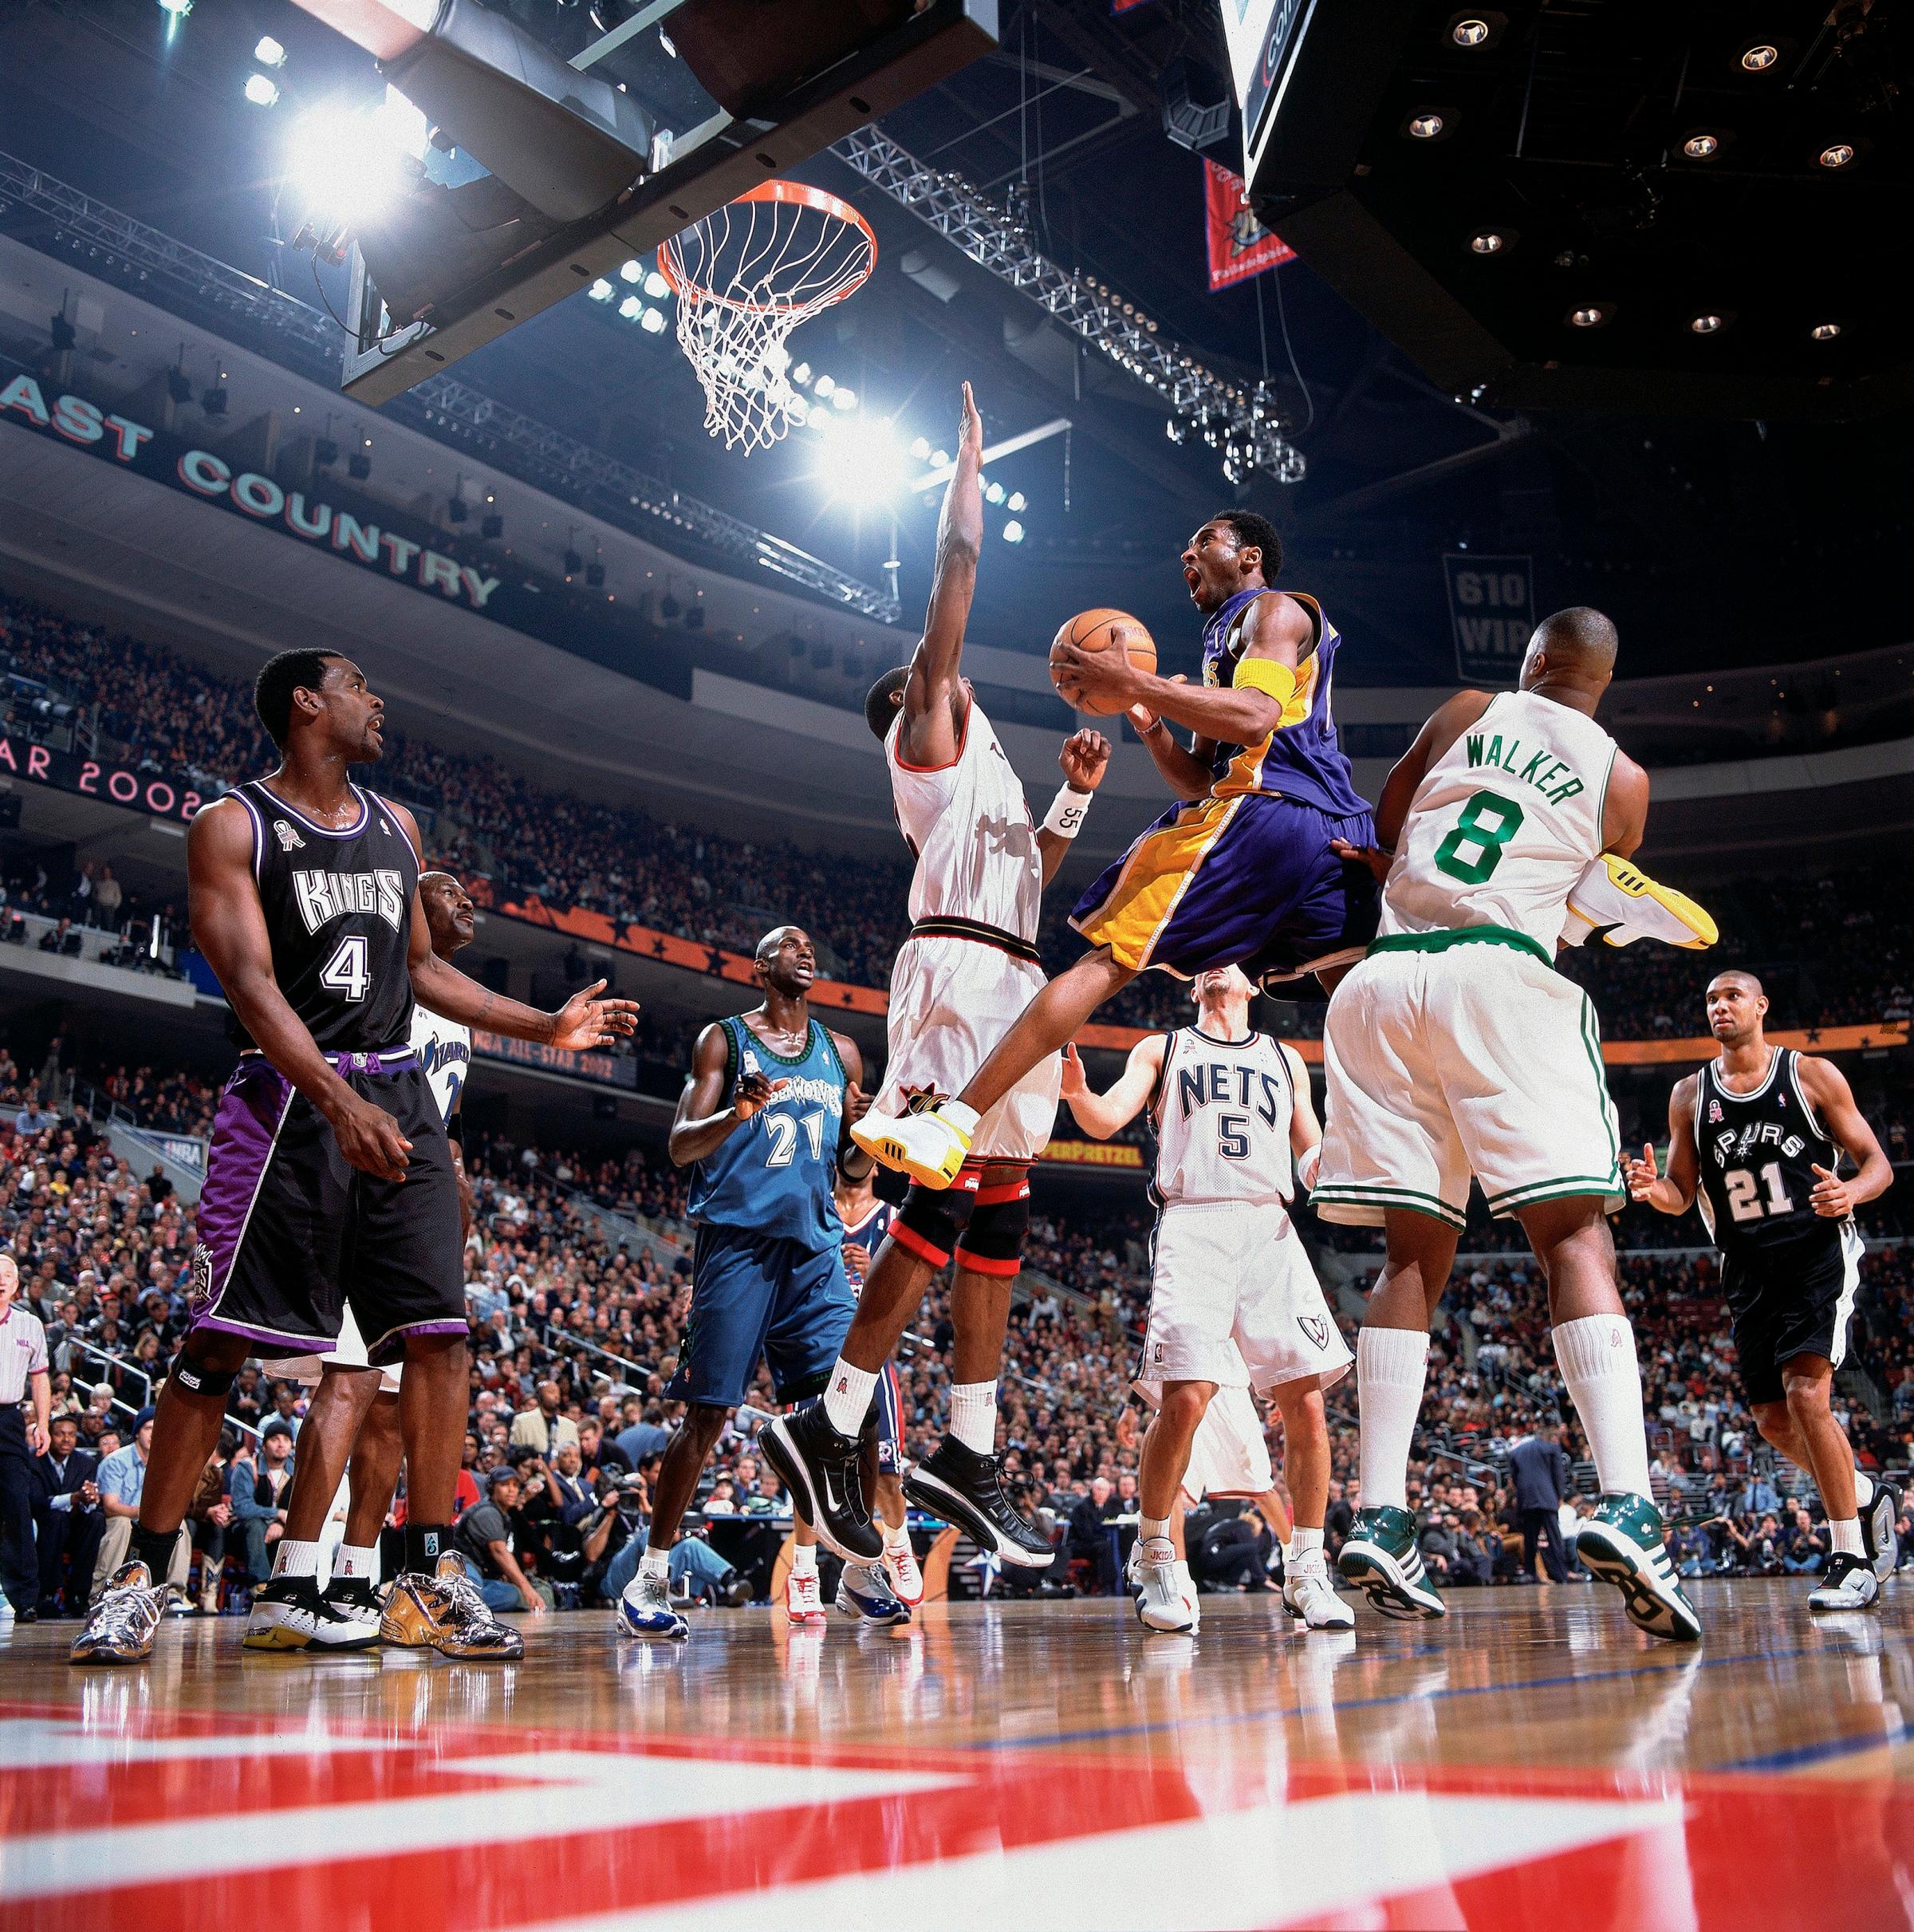 Los Angeles Lakers' Kobe Bryant (8) in action during the NBA All-Star basketball game in Philadelphia on Feb. 9, 2002.